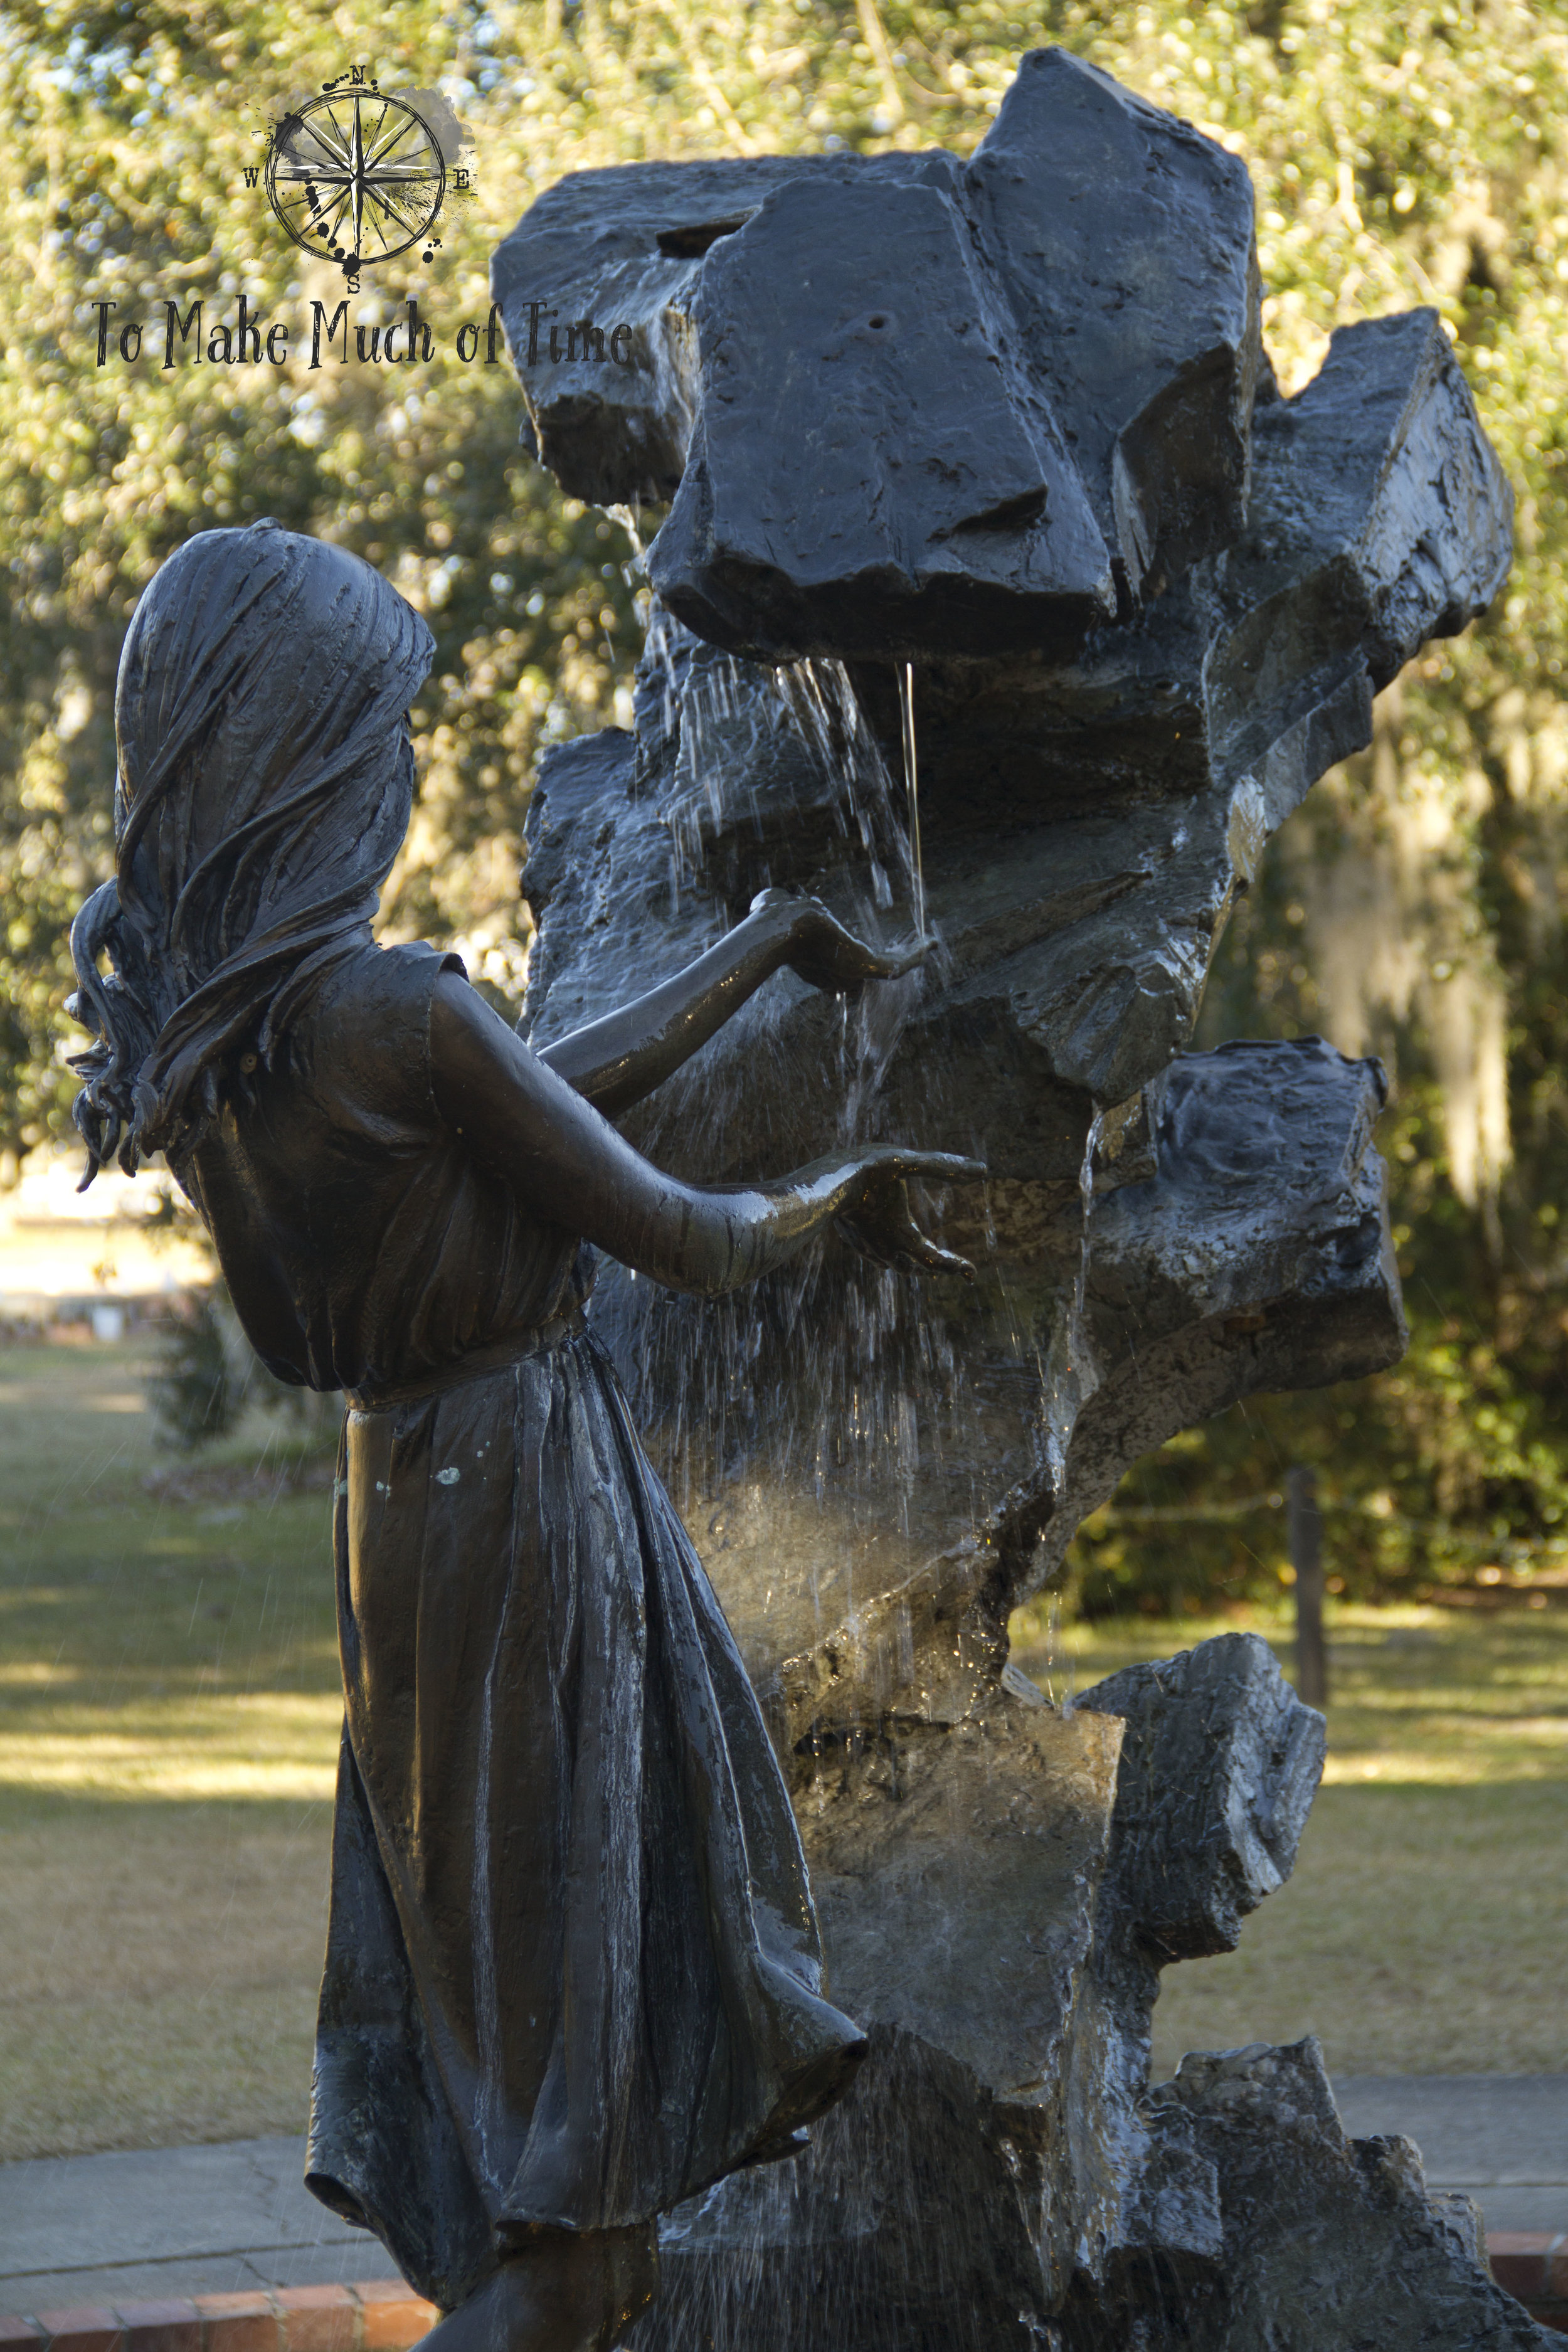 Brookgreen Gardens Girl Fountain Statue | South Carolina | To Make Much of Time